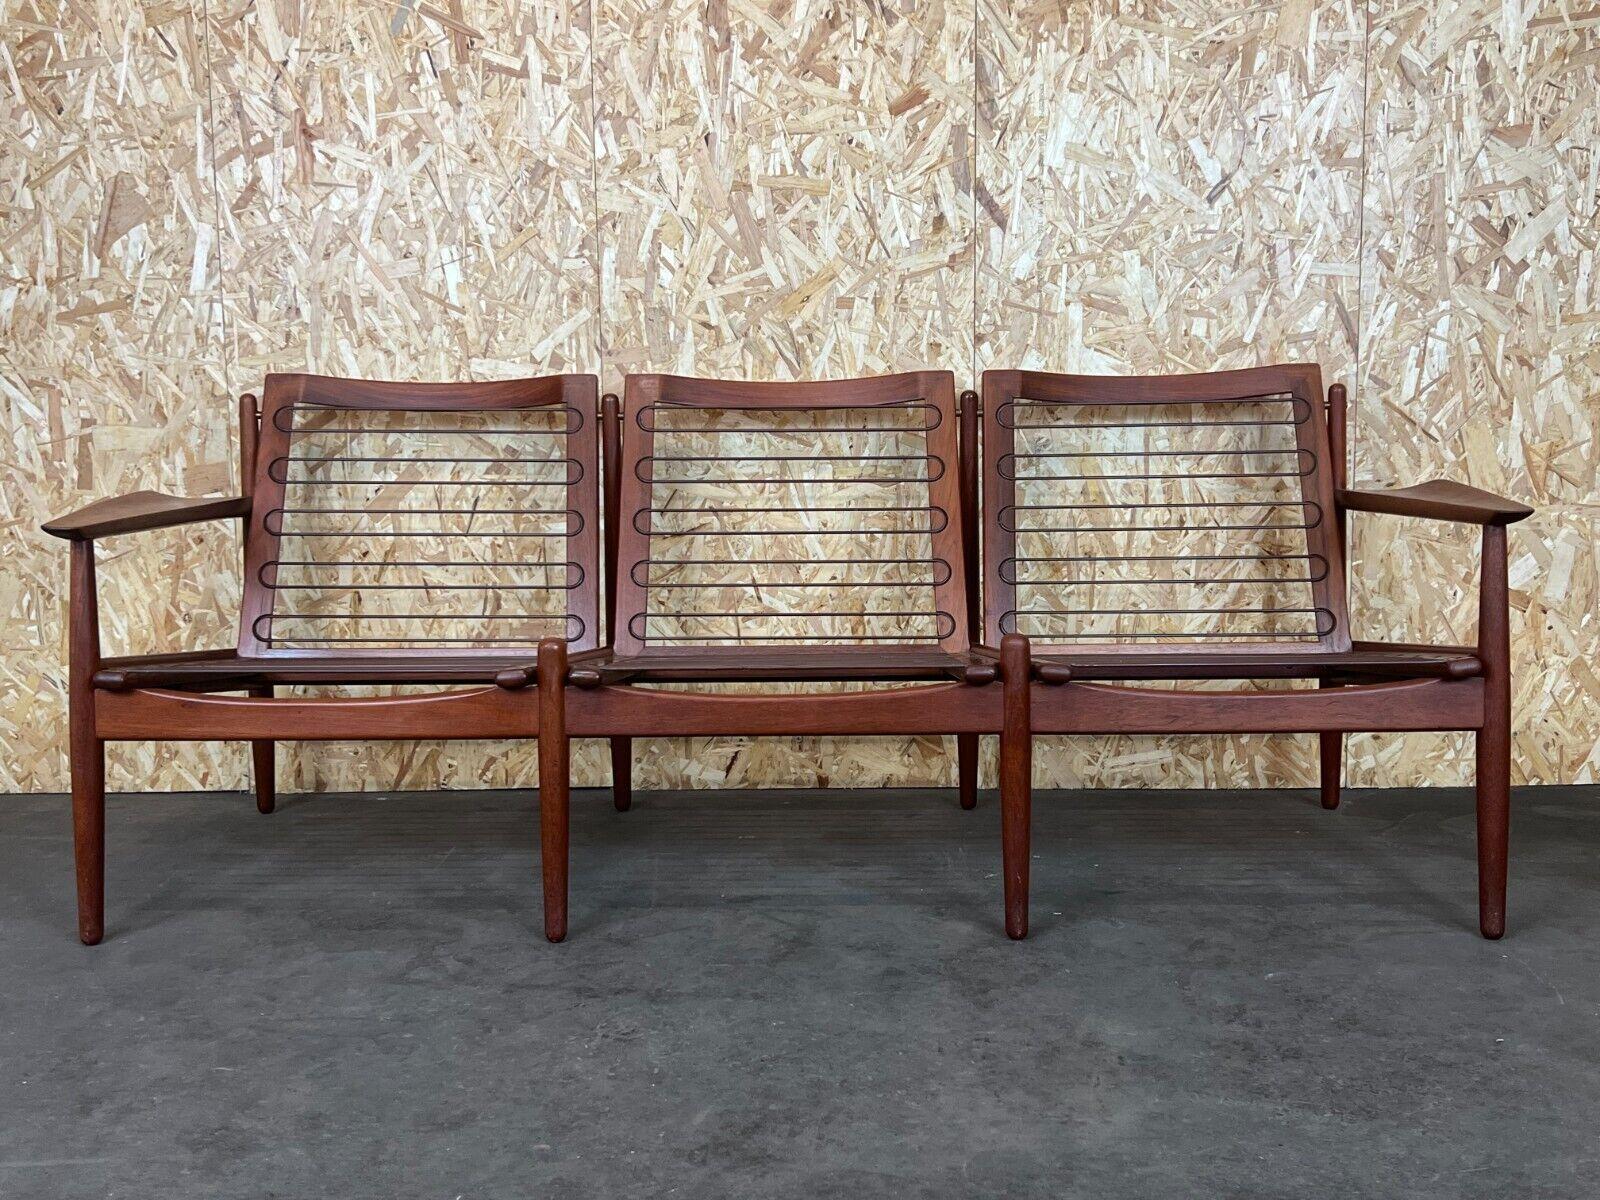 60s 70s teak sofa couch 3-seater Svend Aage Eriksen for Glostrup Danish Design  For Sale 3